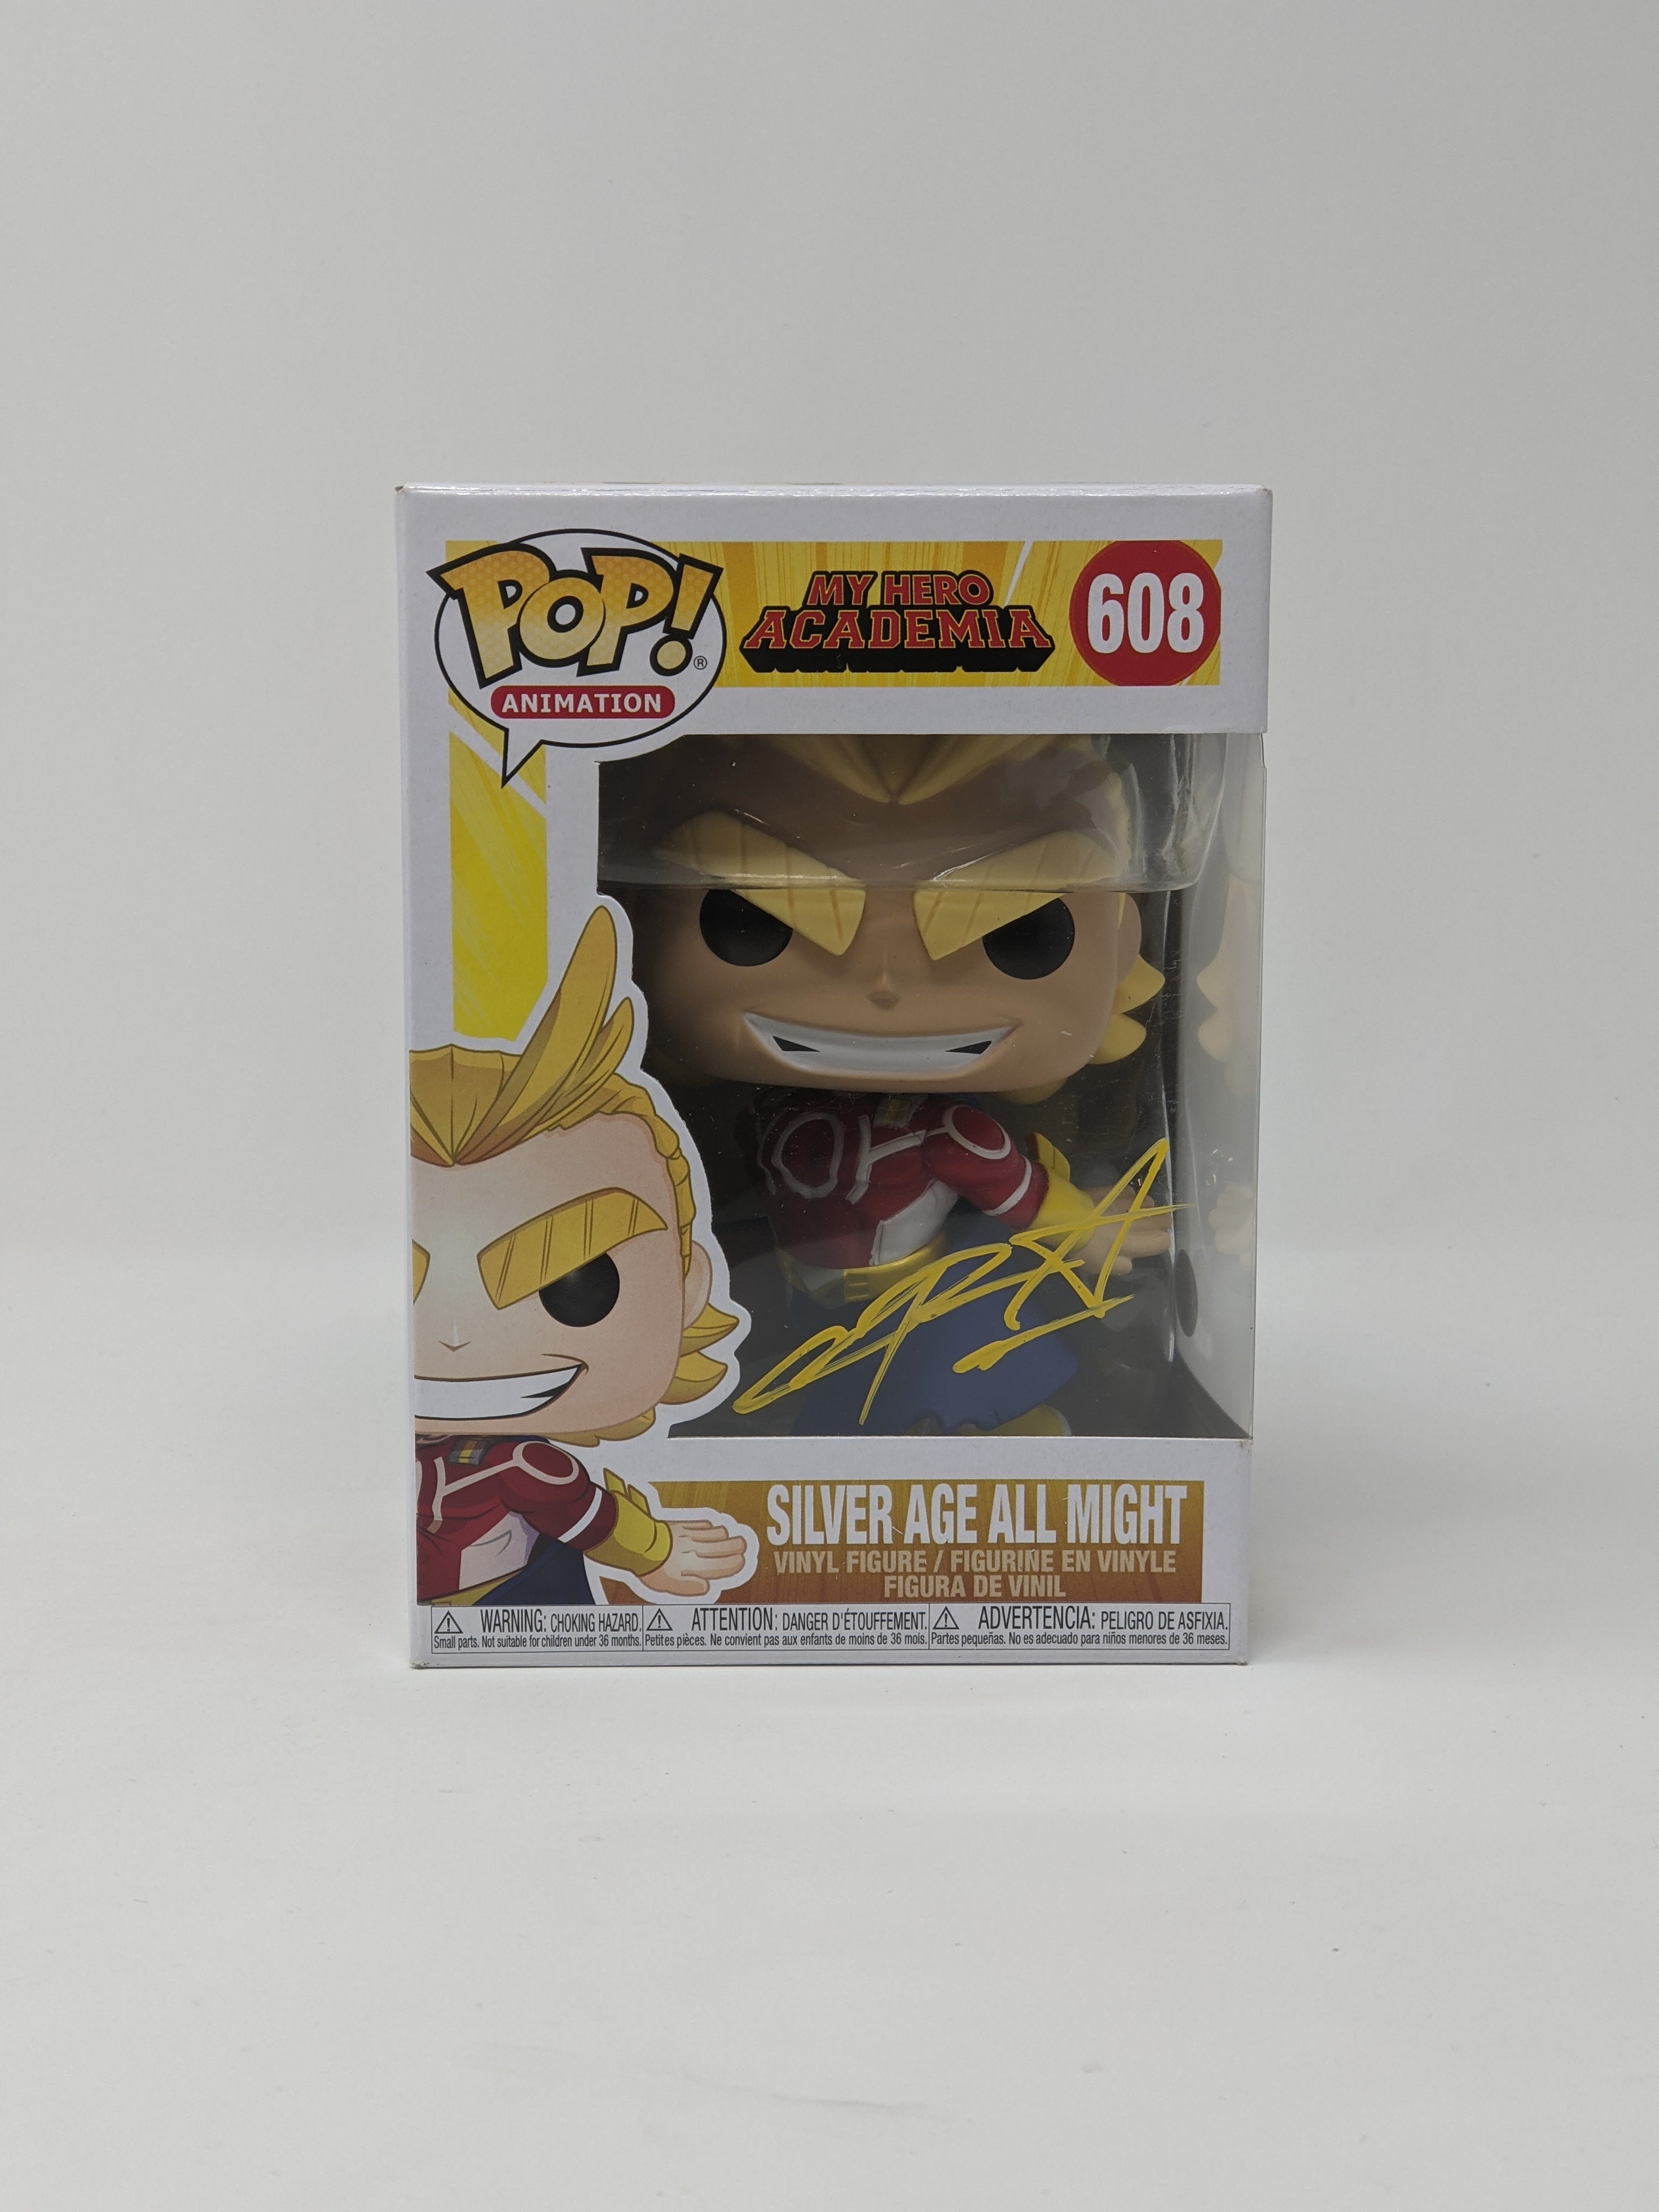 Chris Sabat My Hero Academia Silver Age All Might #608 Signed Funko Pop JSA COA Certified Autograph GalaxyCon